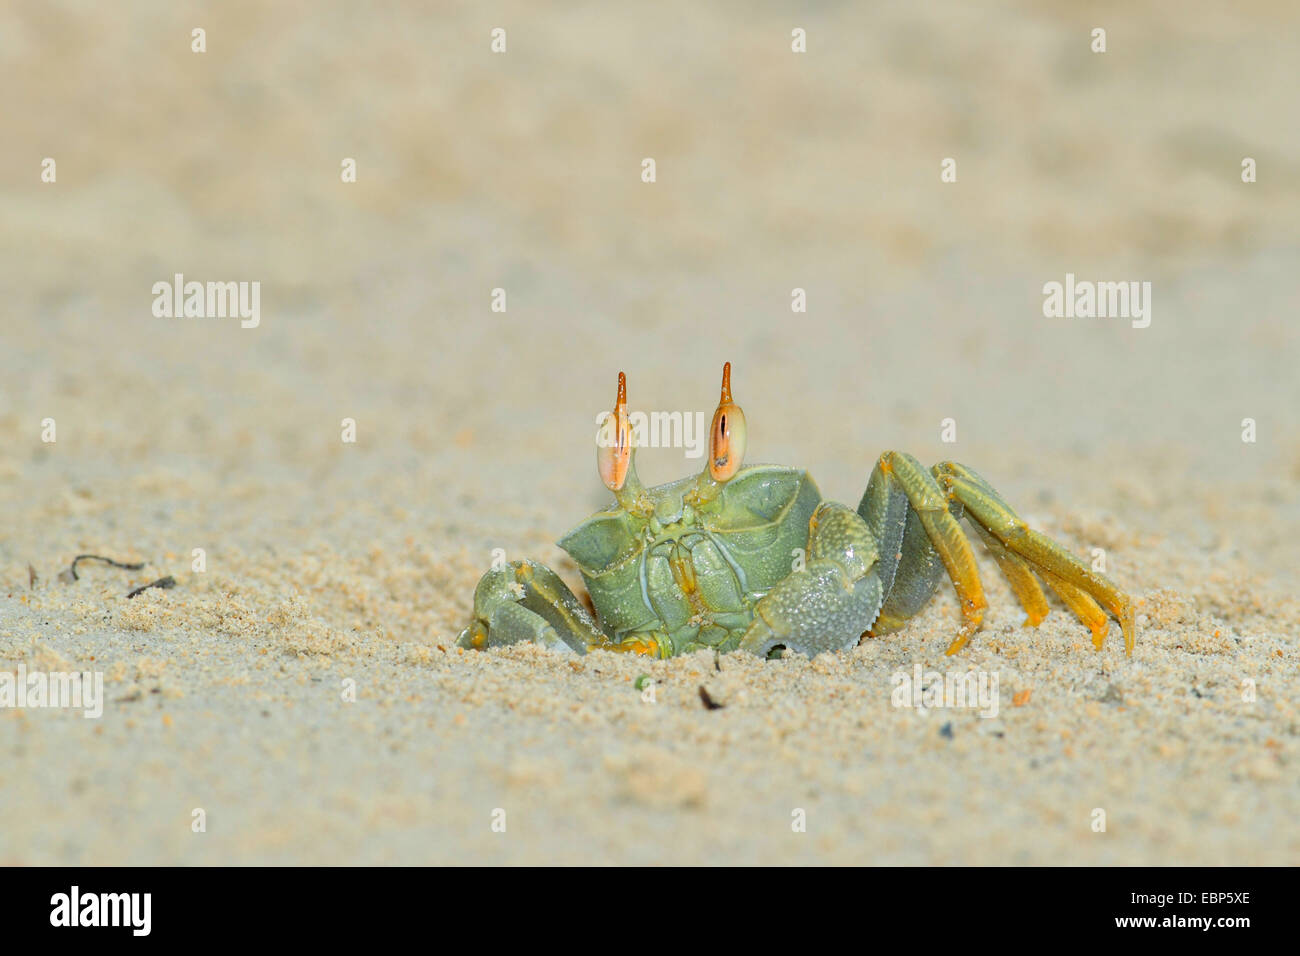 ghost crab, fiddler crab (Ocypodidae), crawling out of the cave in the sand, Seychelles, Bird Island Stock Photo